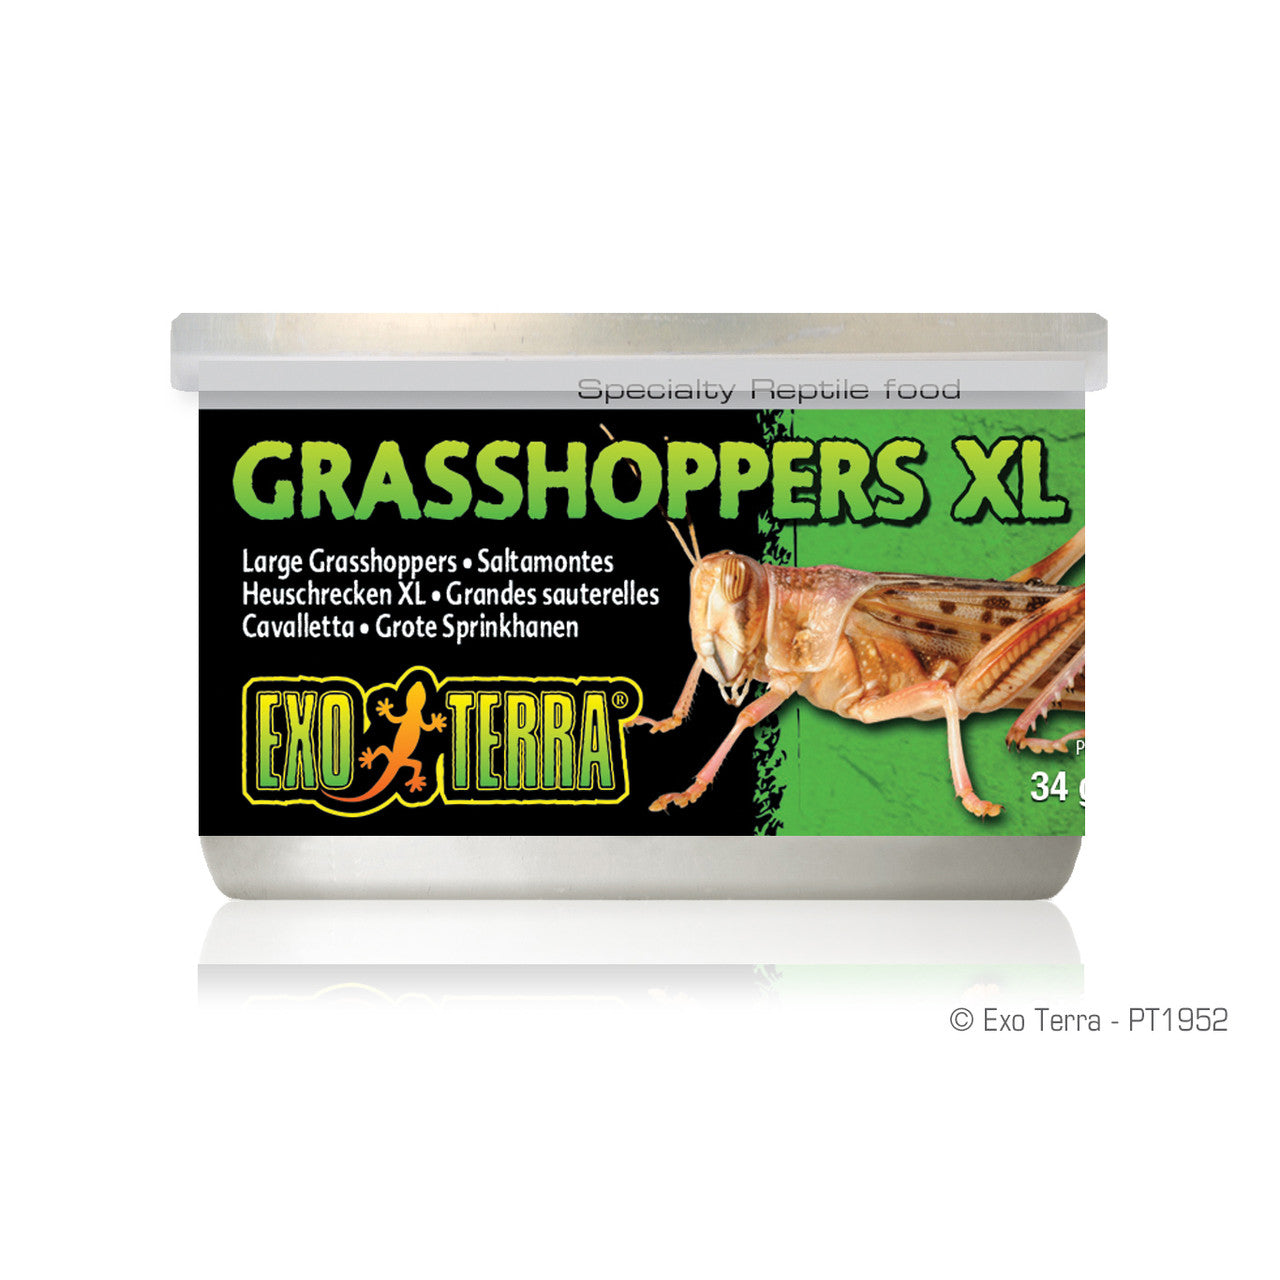 Exo Terra Canned Grasshoppers XL, 1.2 oz 015561219525